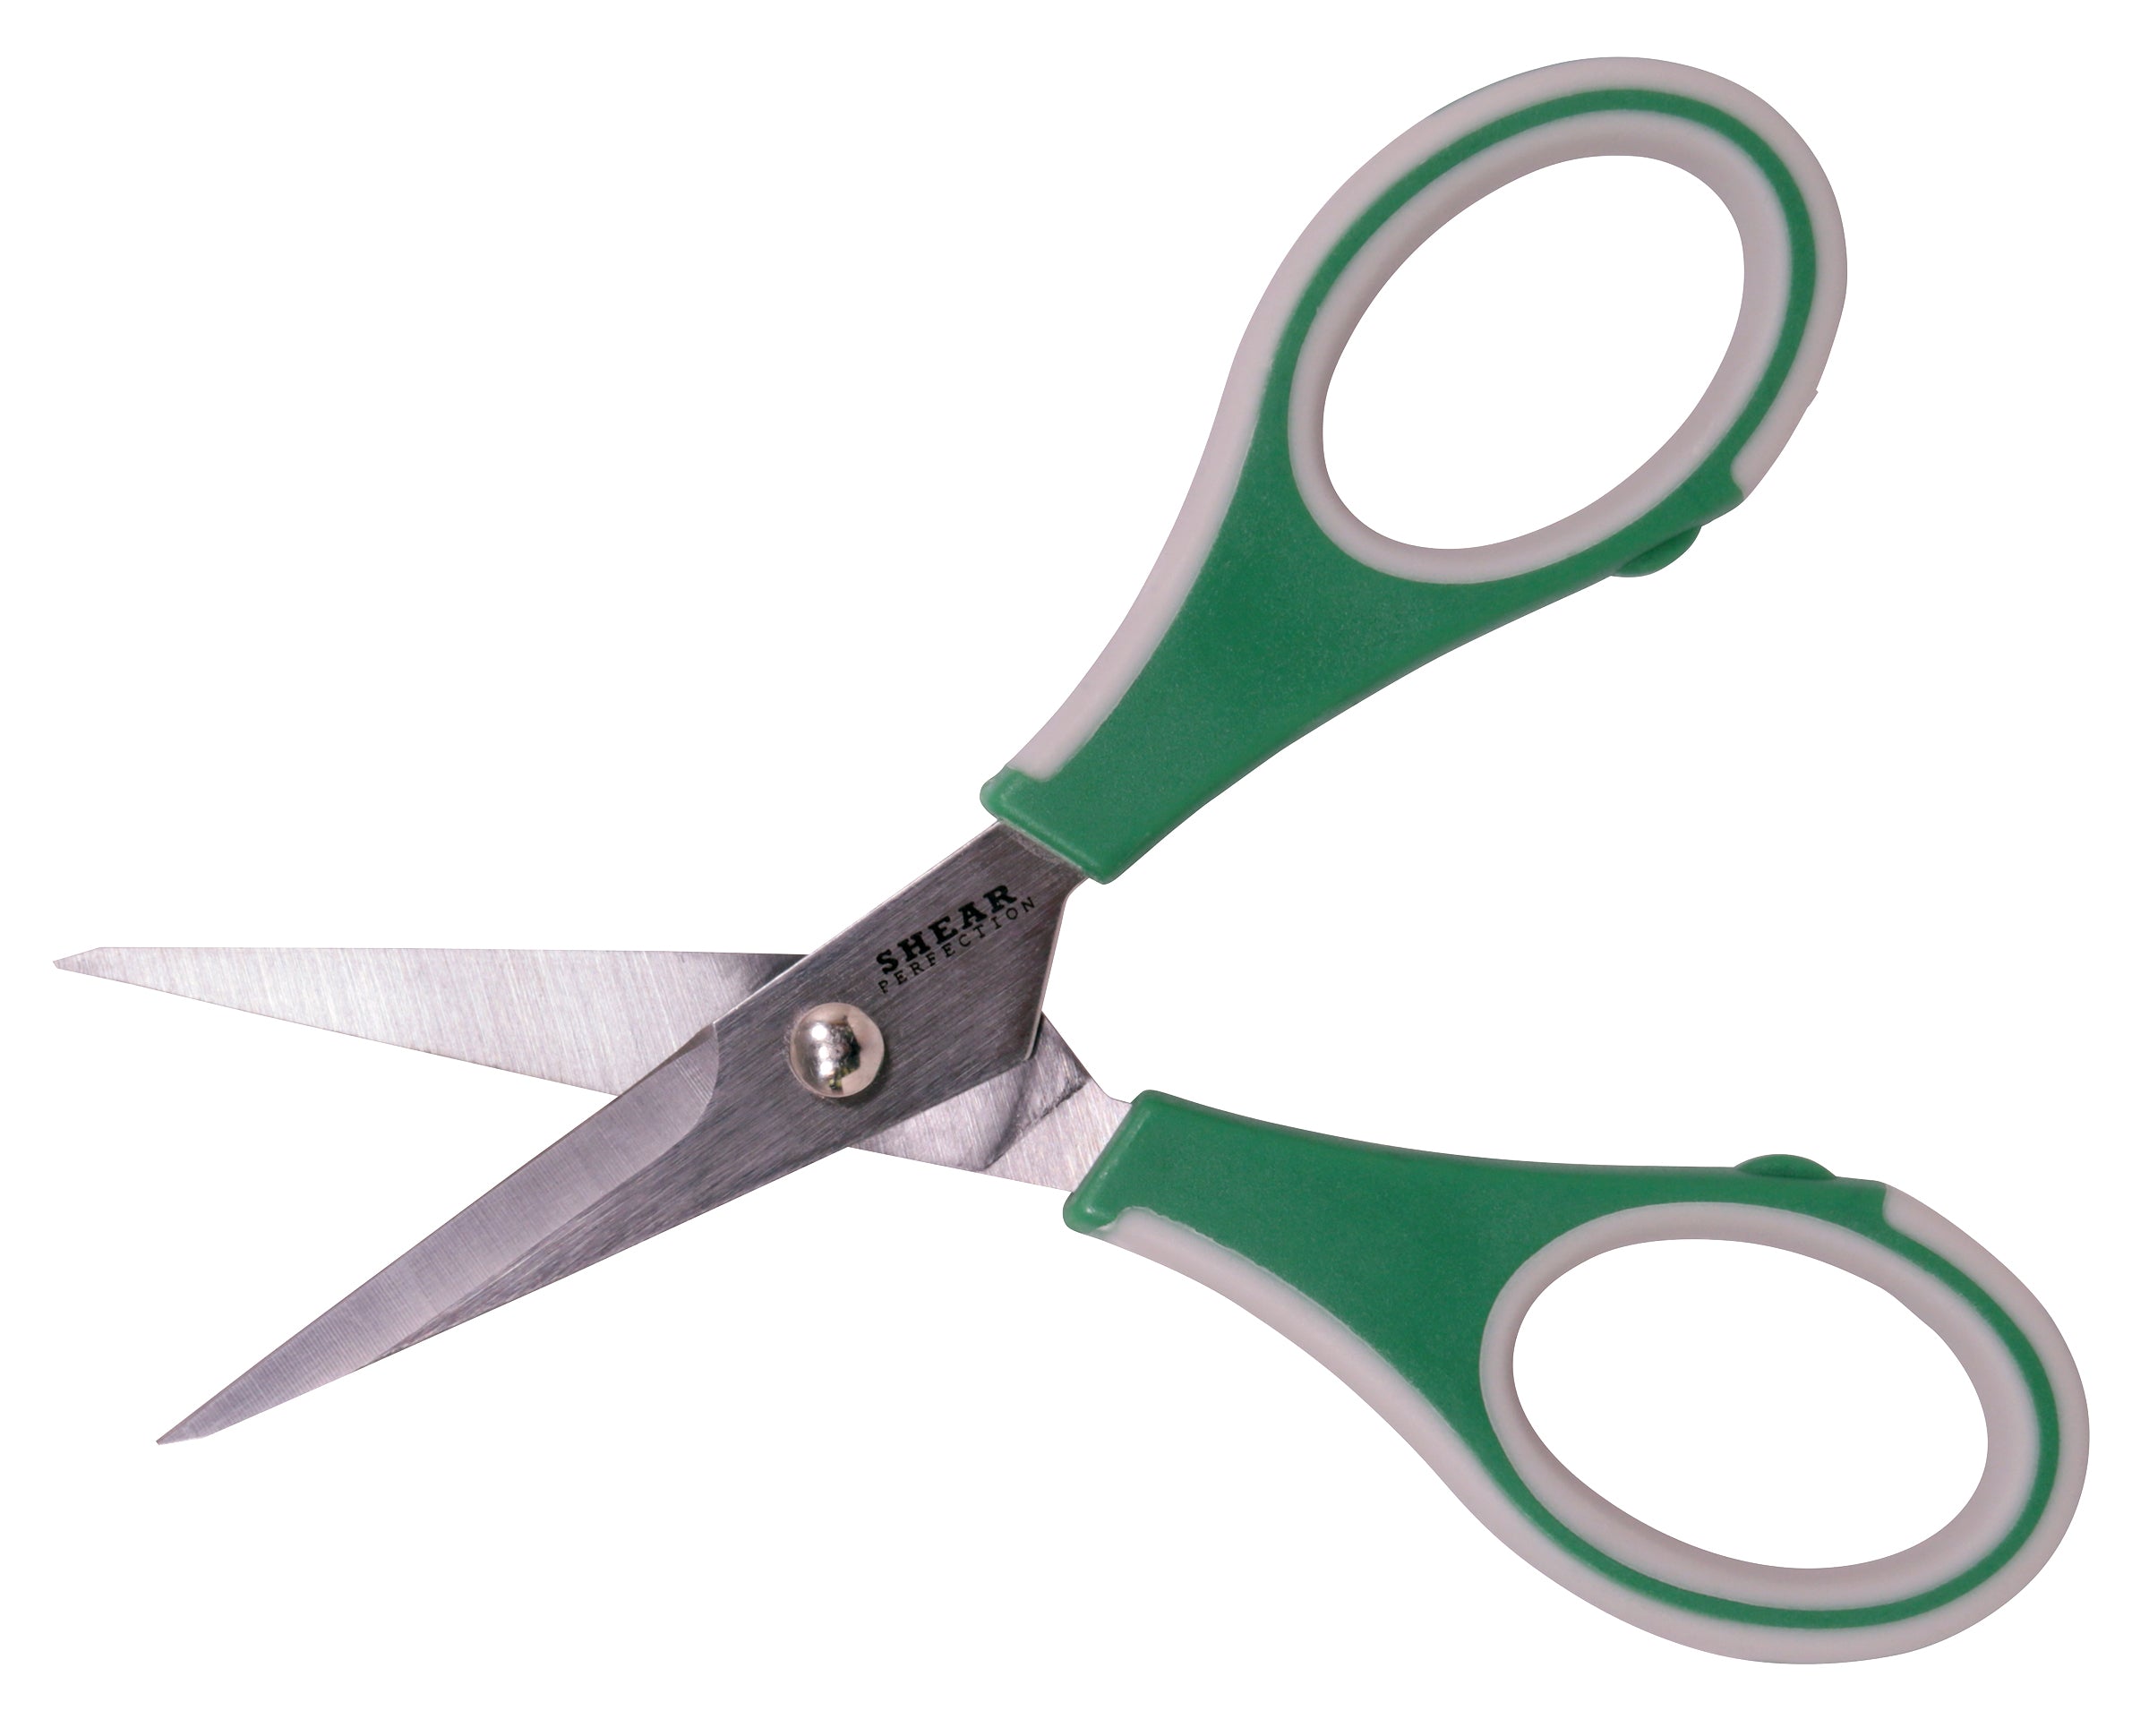 Shear Perfection Precision Scissor 2 – Sunset Hydroponics and Home Brewing